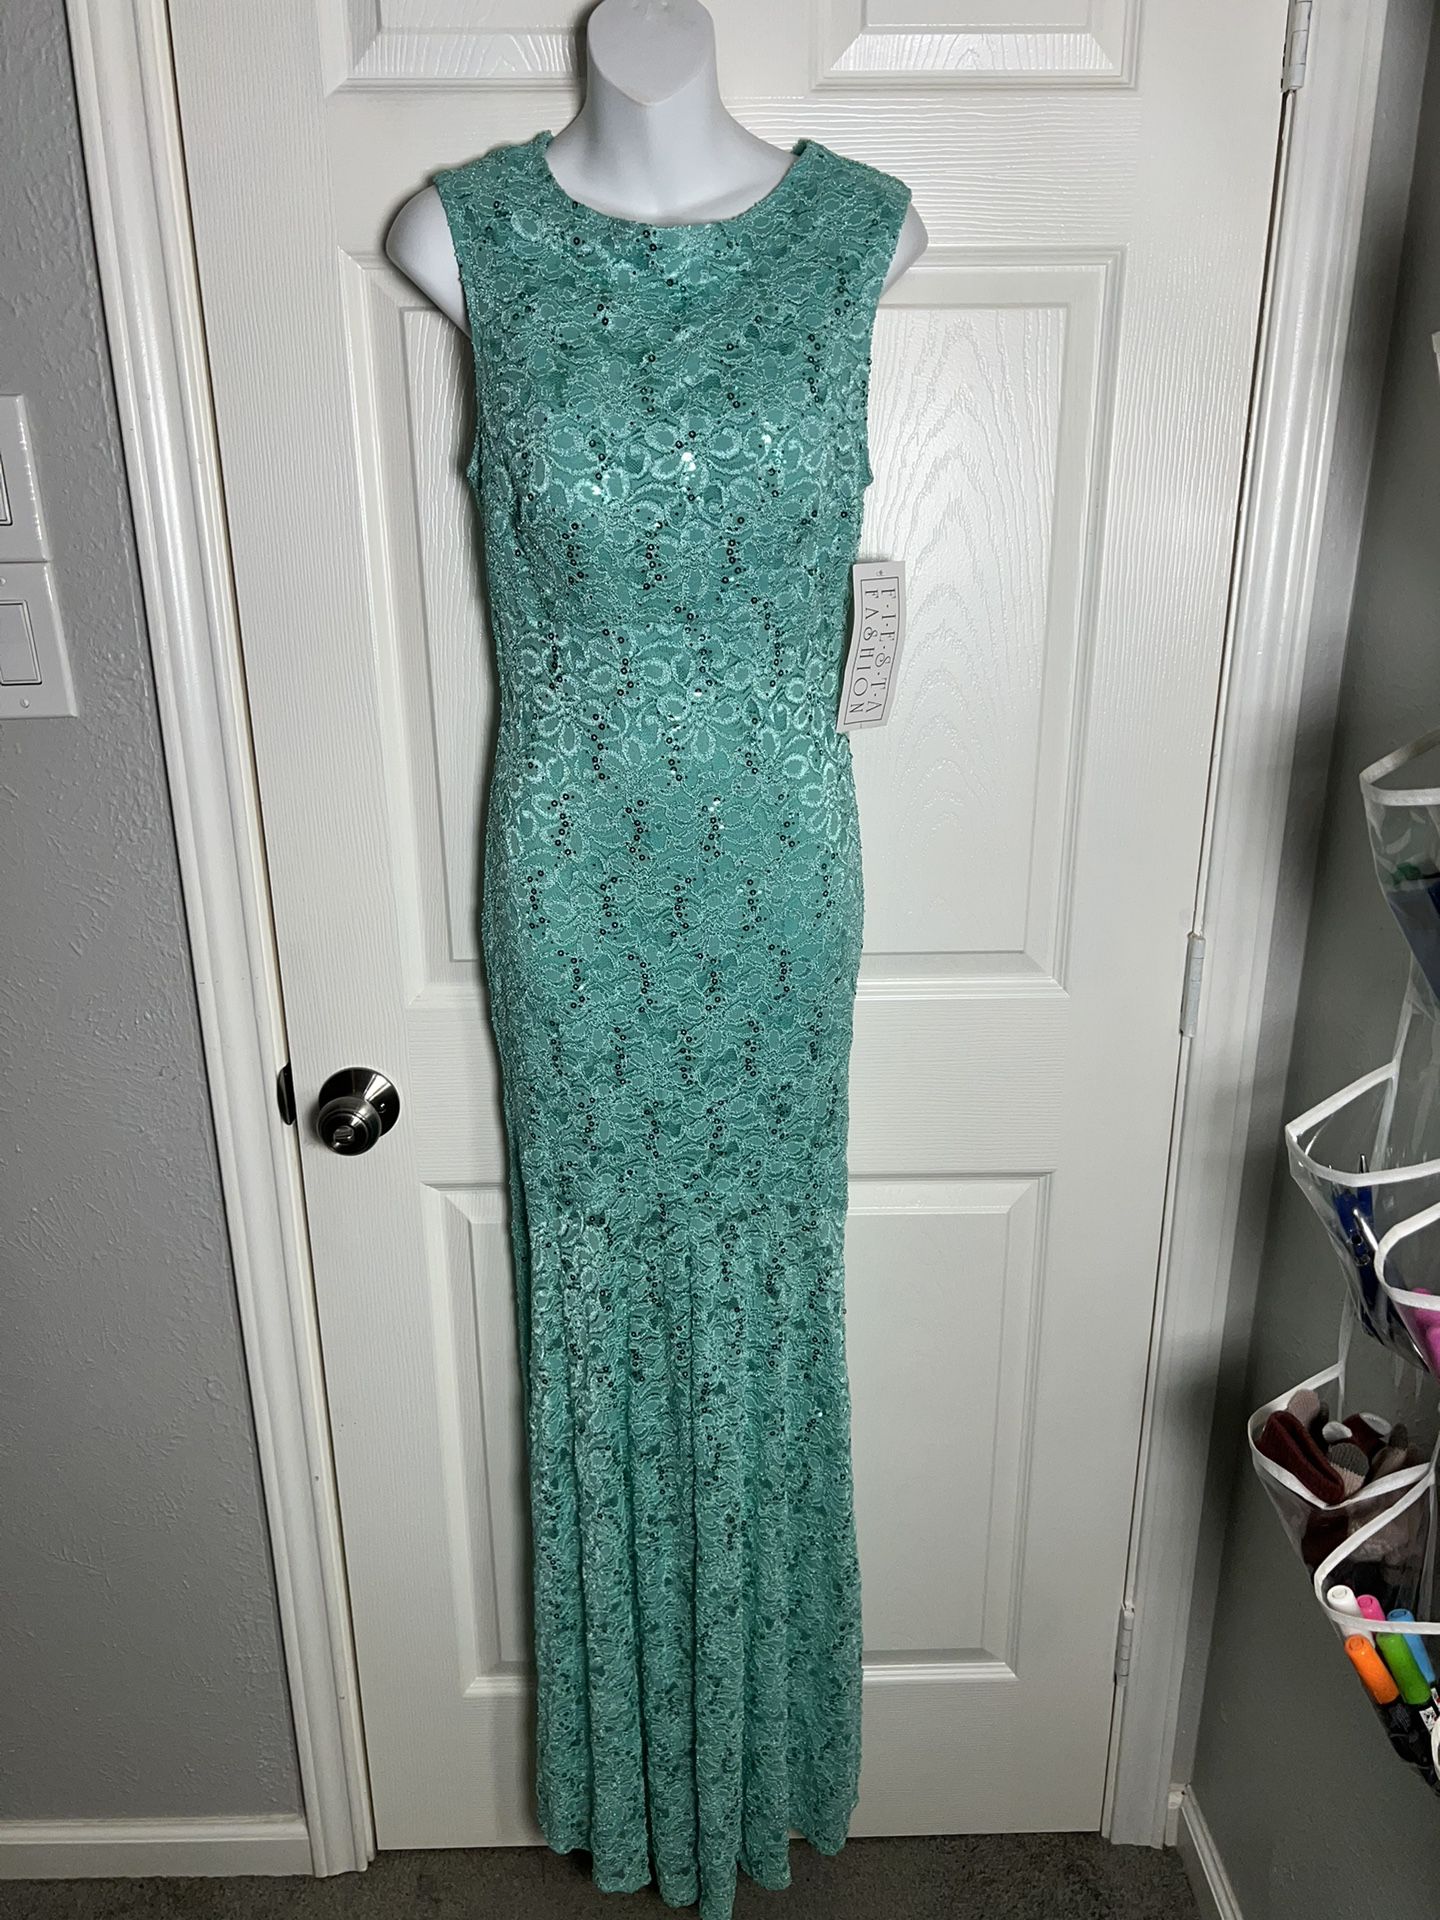 Mint Green Sequined Full Length Fish Tail Prom Dress